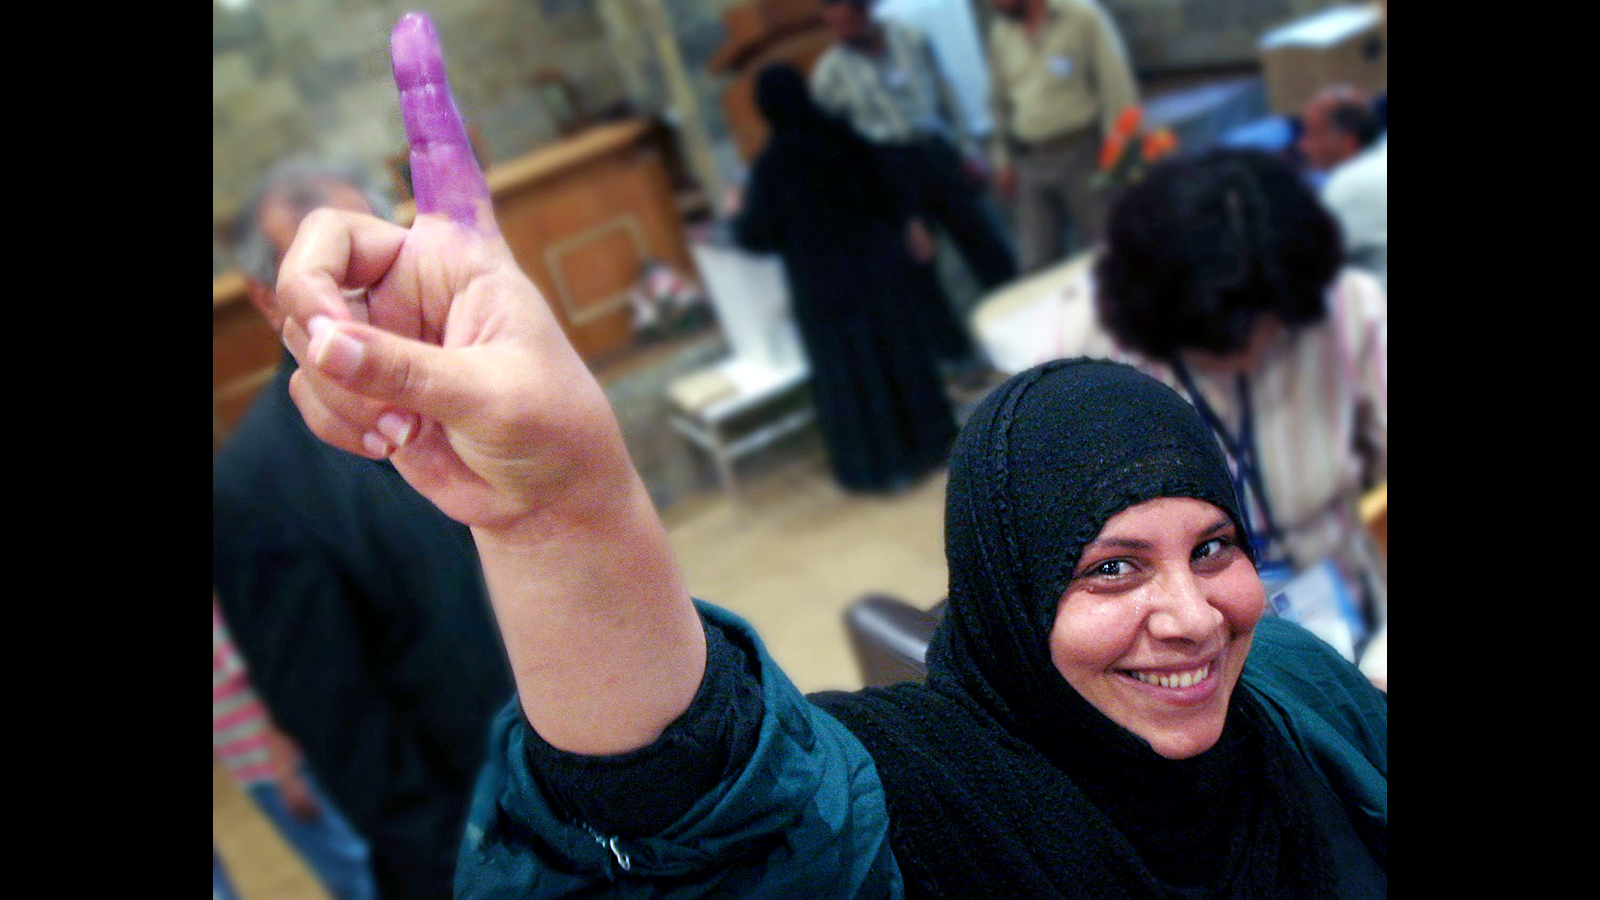 An employee at Yarmouk Hospital raises her inked finger after voting in the constitutional referendum in Baghdad October 13, 2005. An election official announced that voting on the draft constitution of Iraq would begin today at detention centers and hospitals and would last for a total of three days, with the last being the Referendum Day, October 15, 2005. REUTERS/Thaier Al-Sudani PP05100181 - RTR19CRI